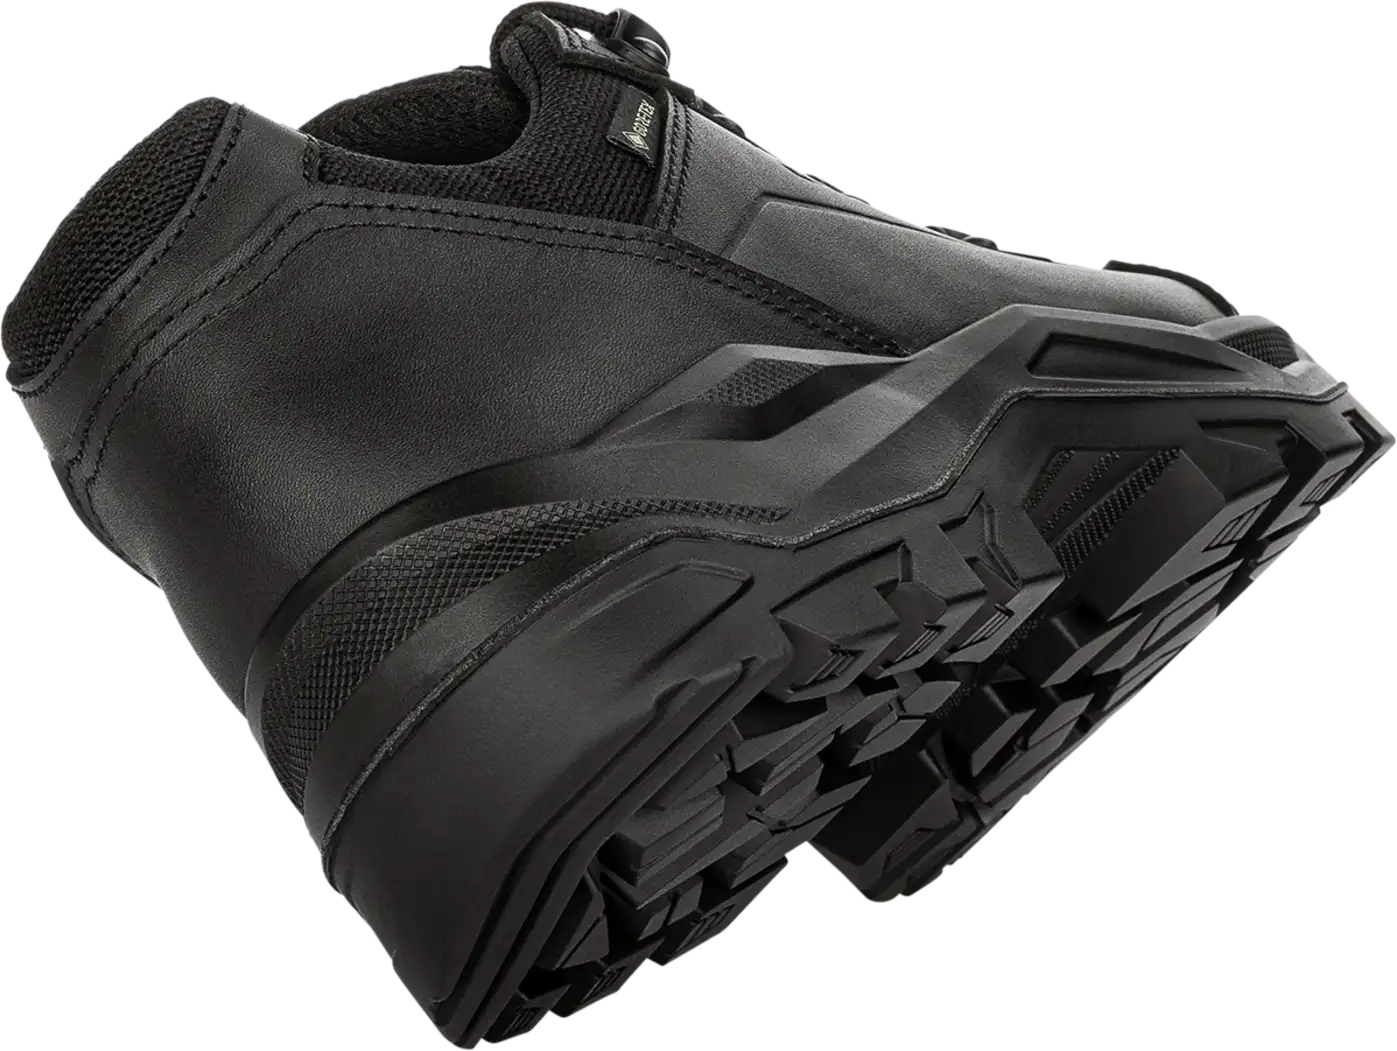 Chaussures de protection basses RENEGADE II GTX LO TF MF - "500612"